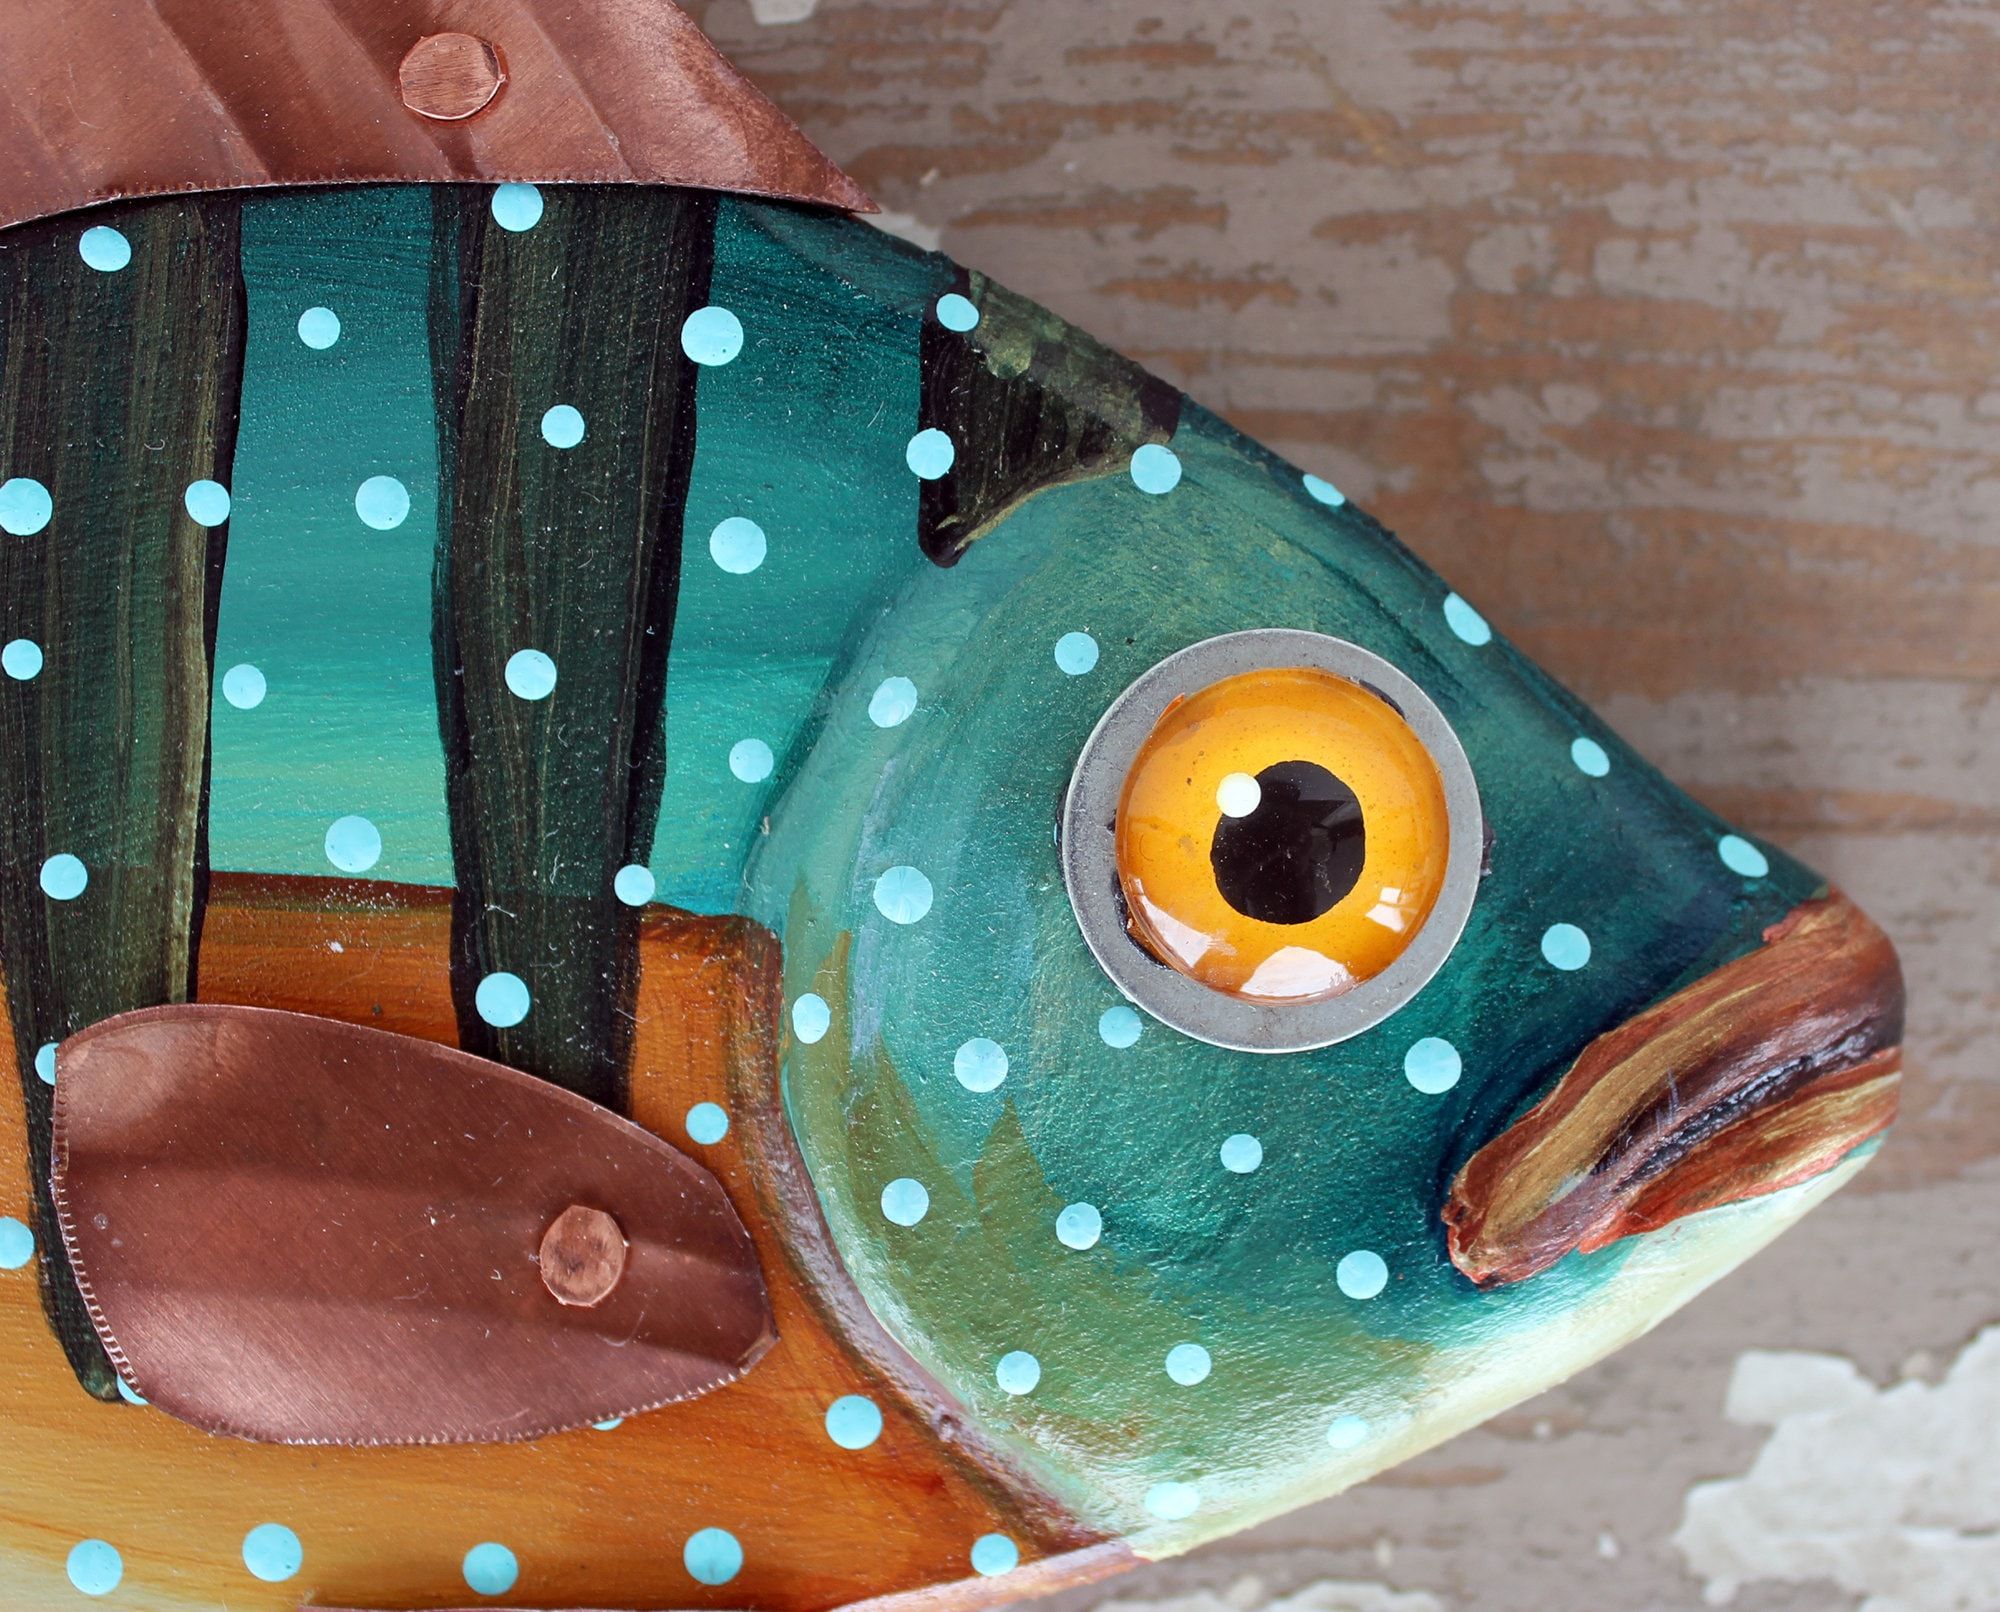 Cece 10, Sunfish Minnow, Happy Hand Painted Wood Fish Wall Art,copper Throughout Fish Wall Art (View 7 of 15)